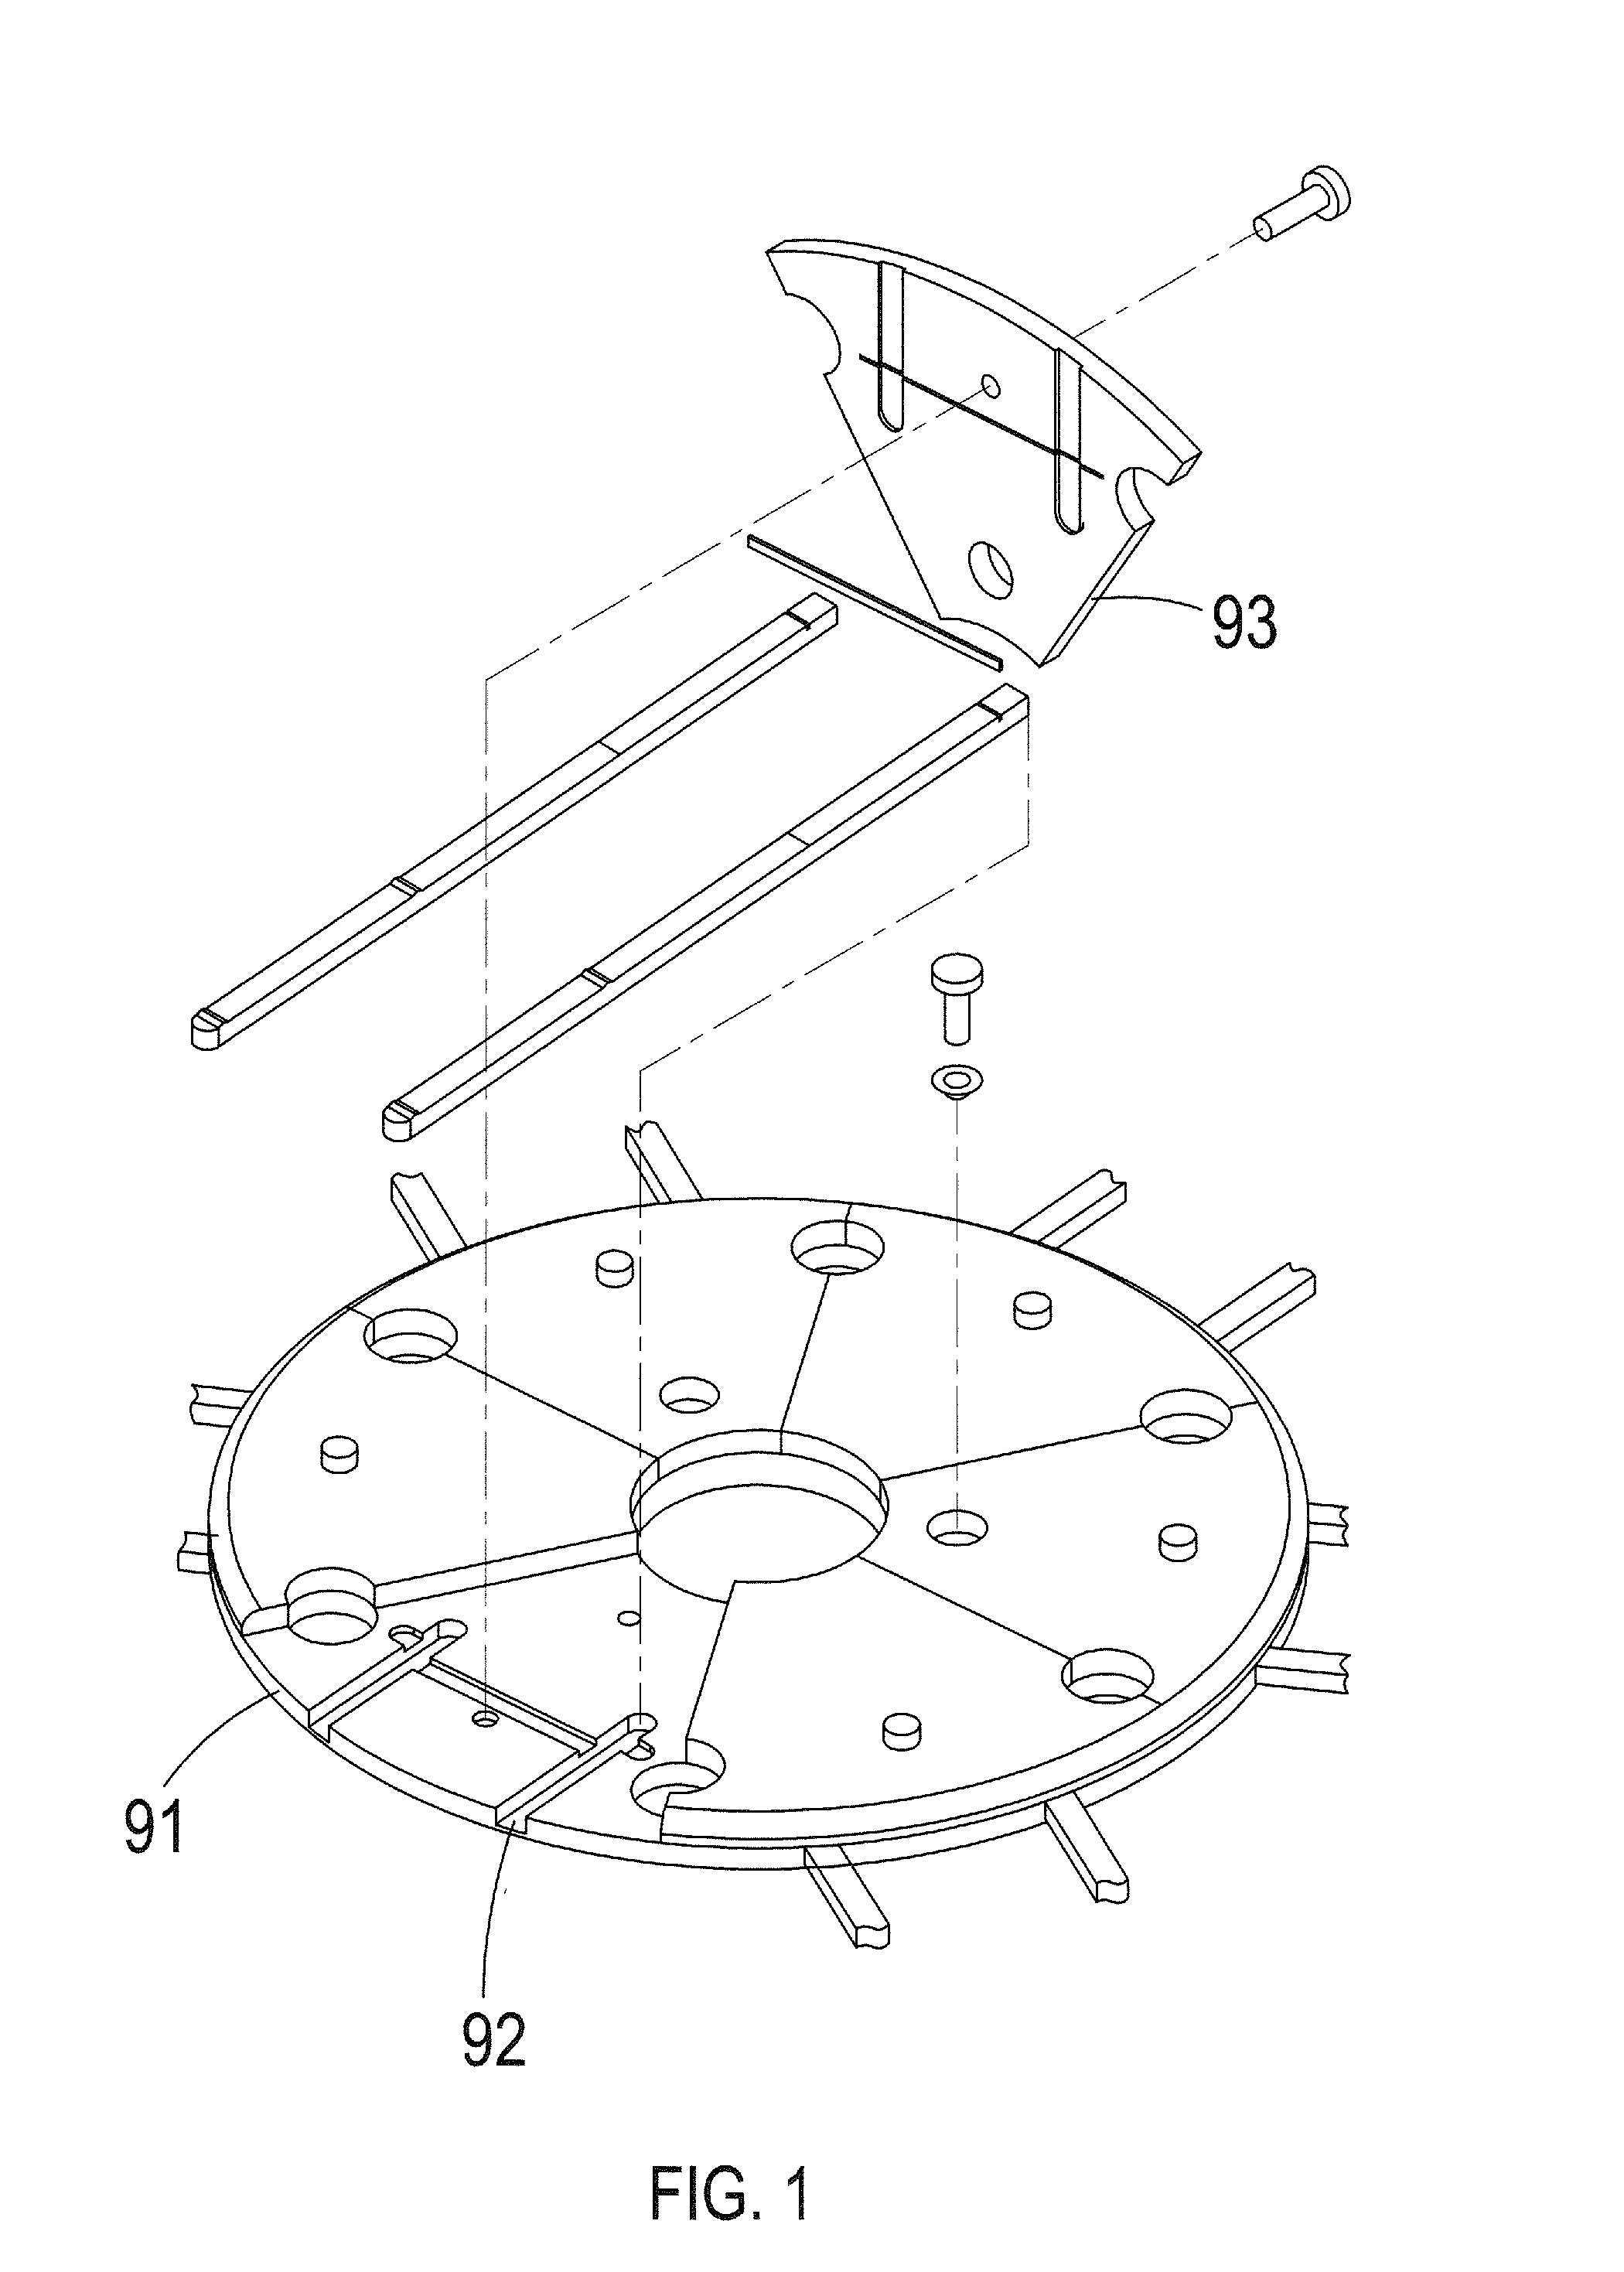 Structure of Sextant Rotary Disk